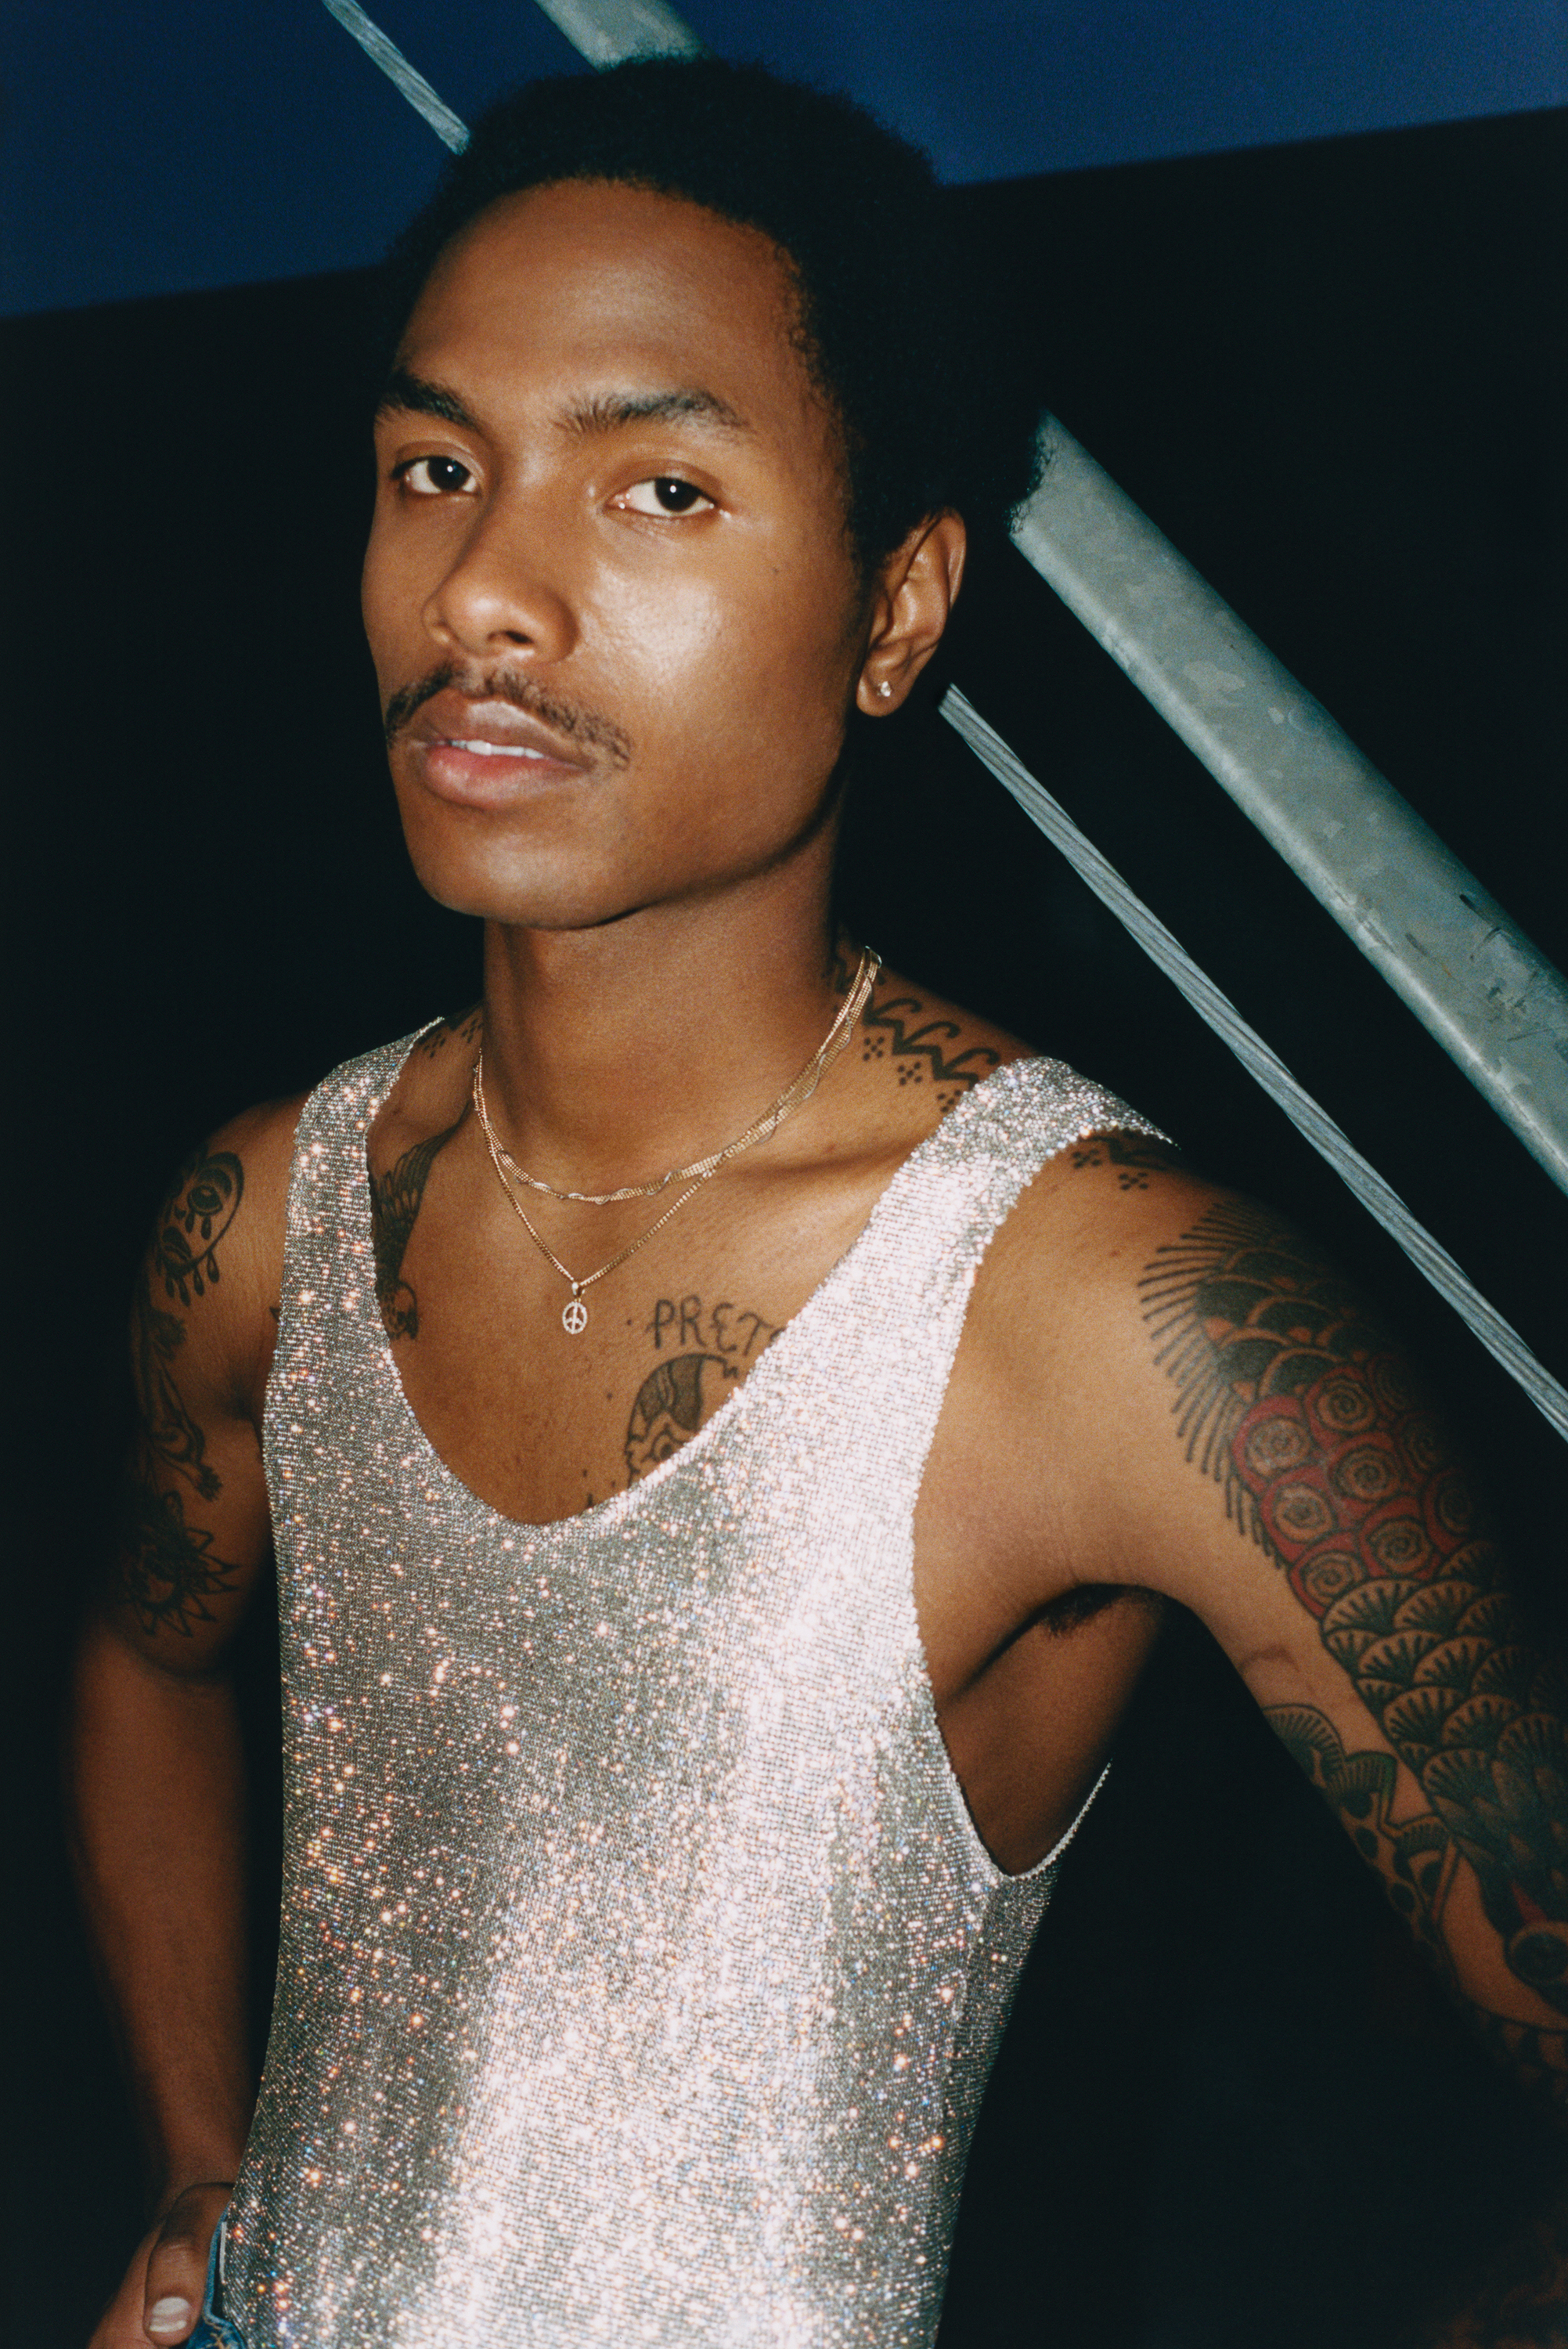 Steve Lacy discusses his debut album, life and love